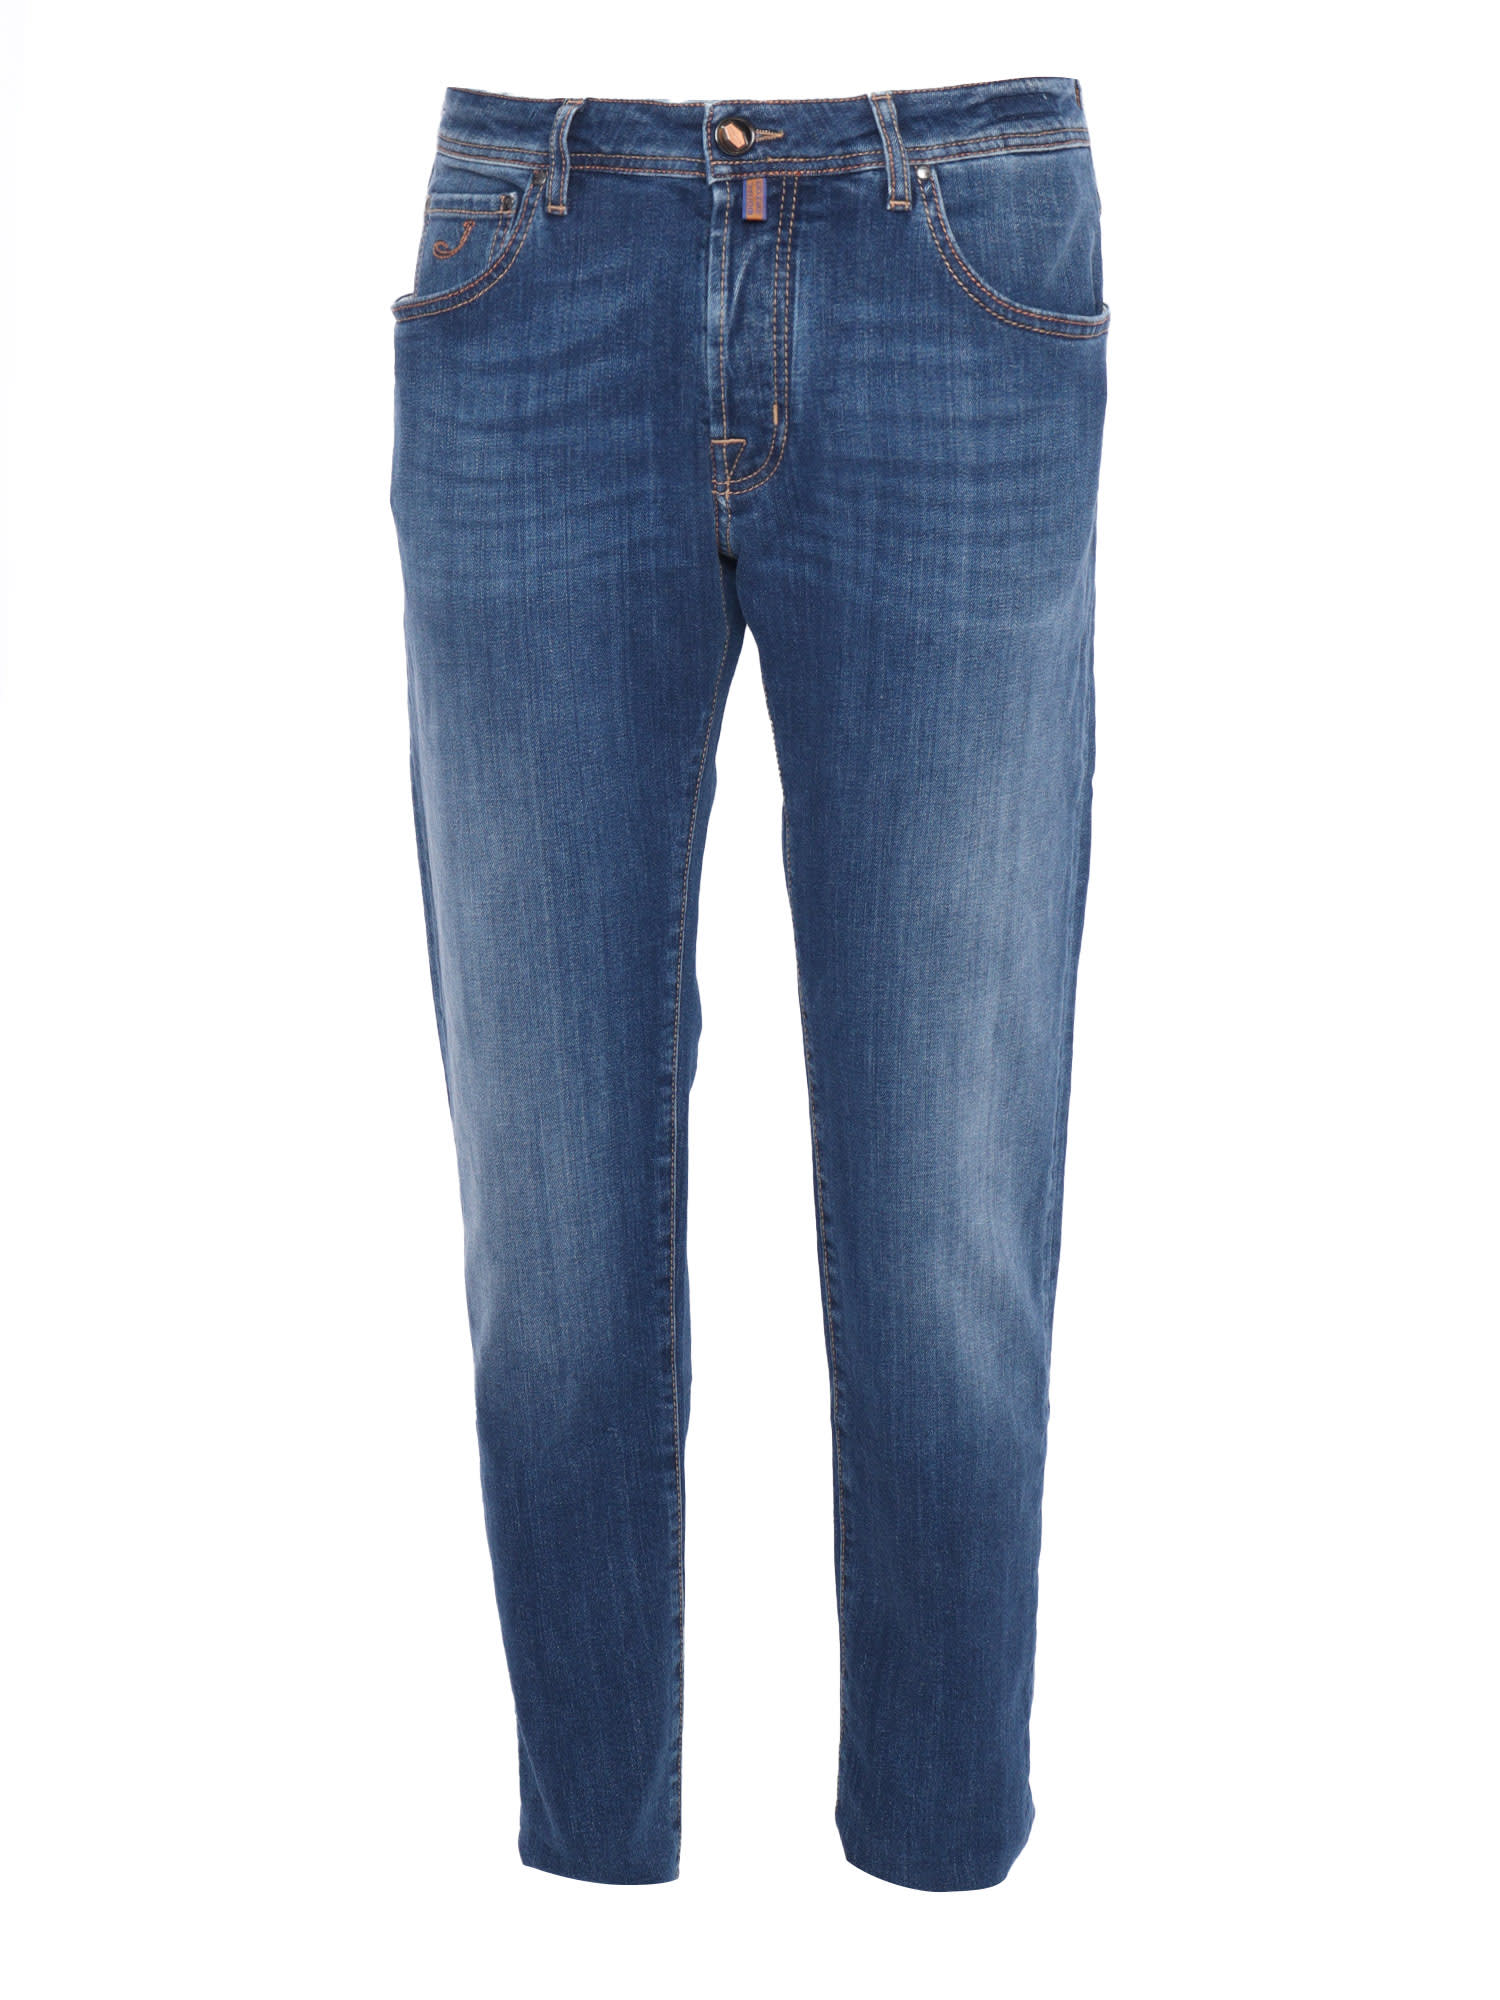 JACOB COHEN STONE WASHED JEANS